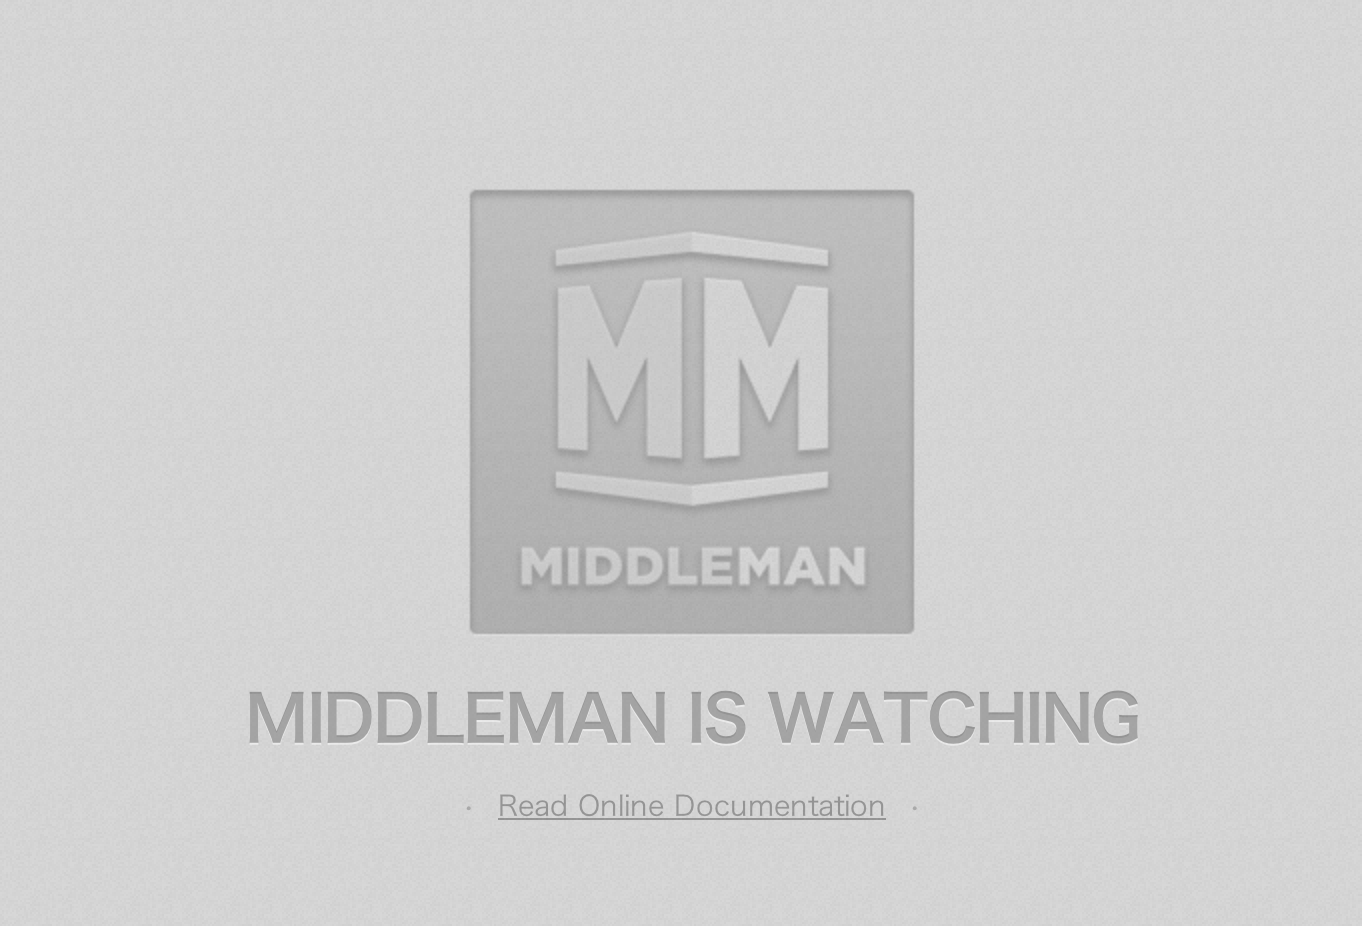 MiddleMan is watching